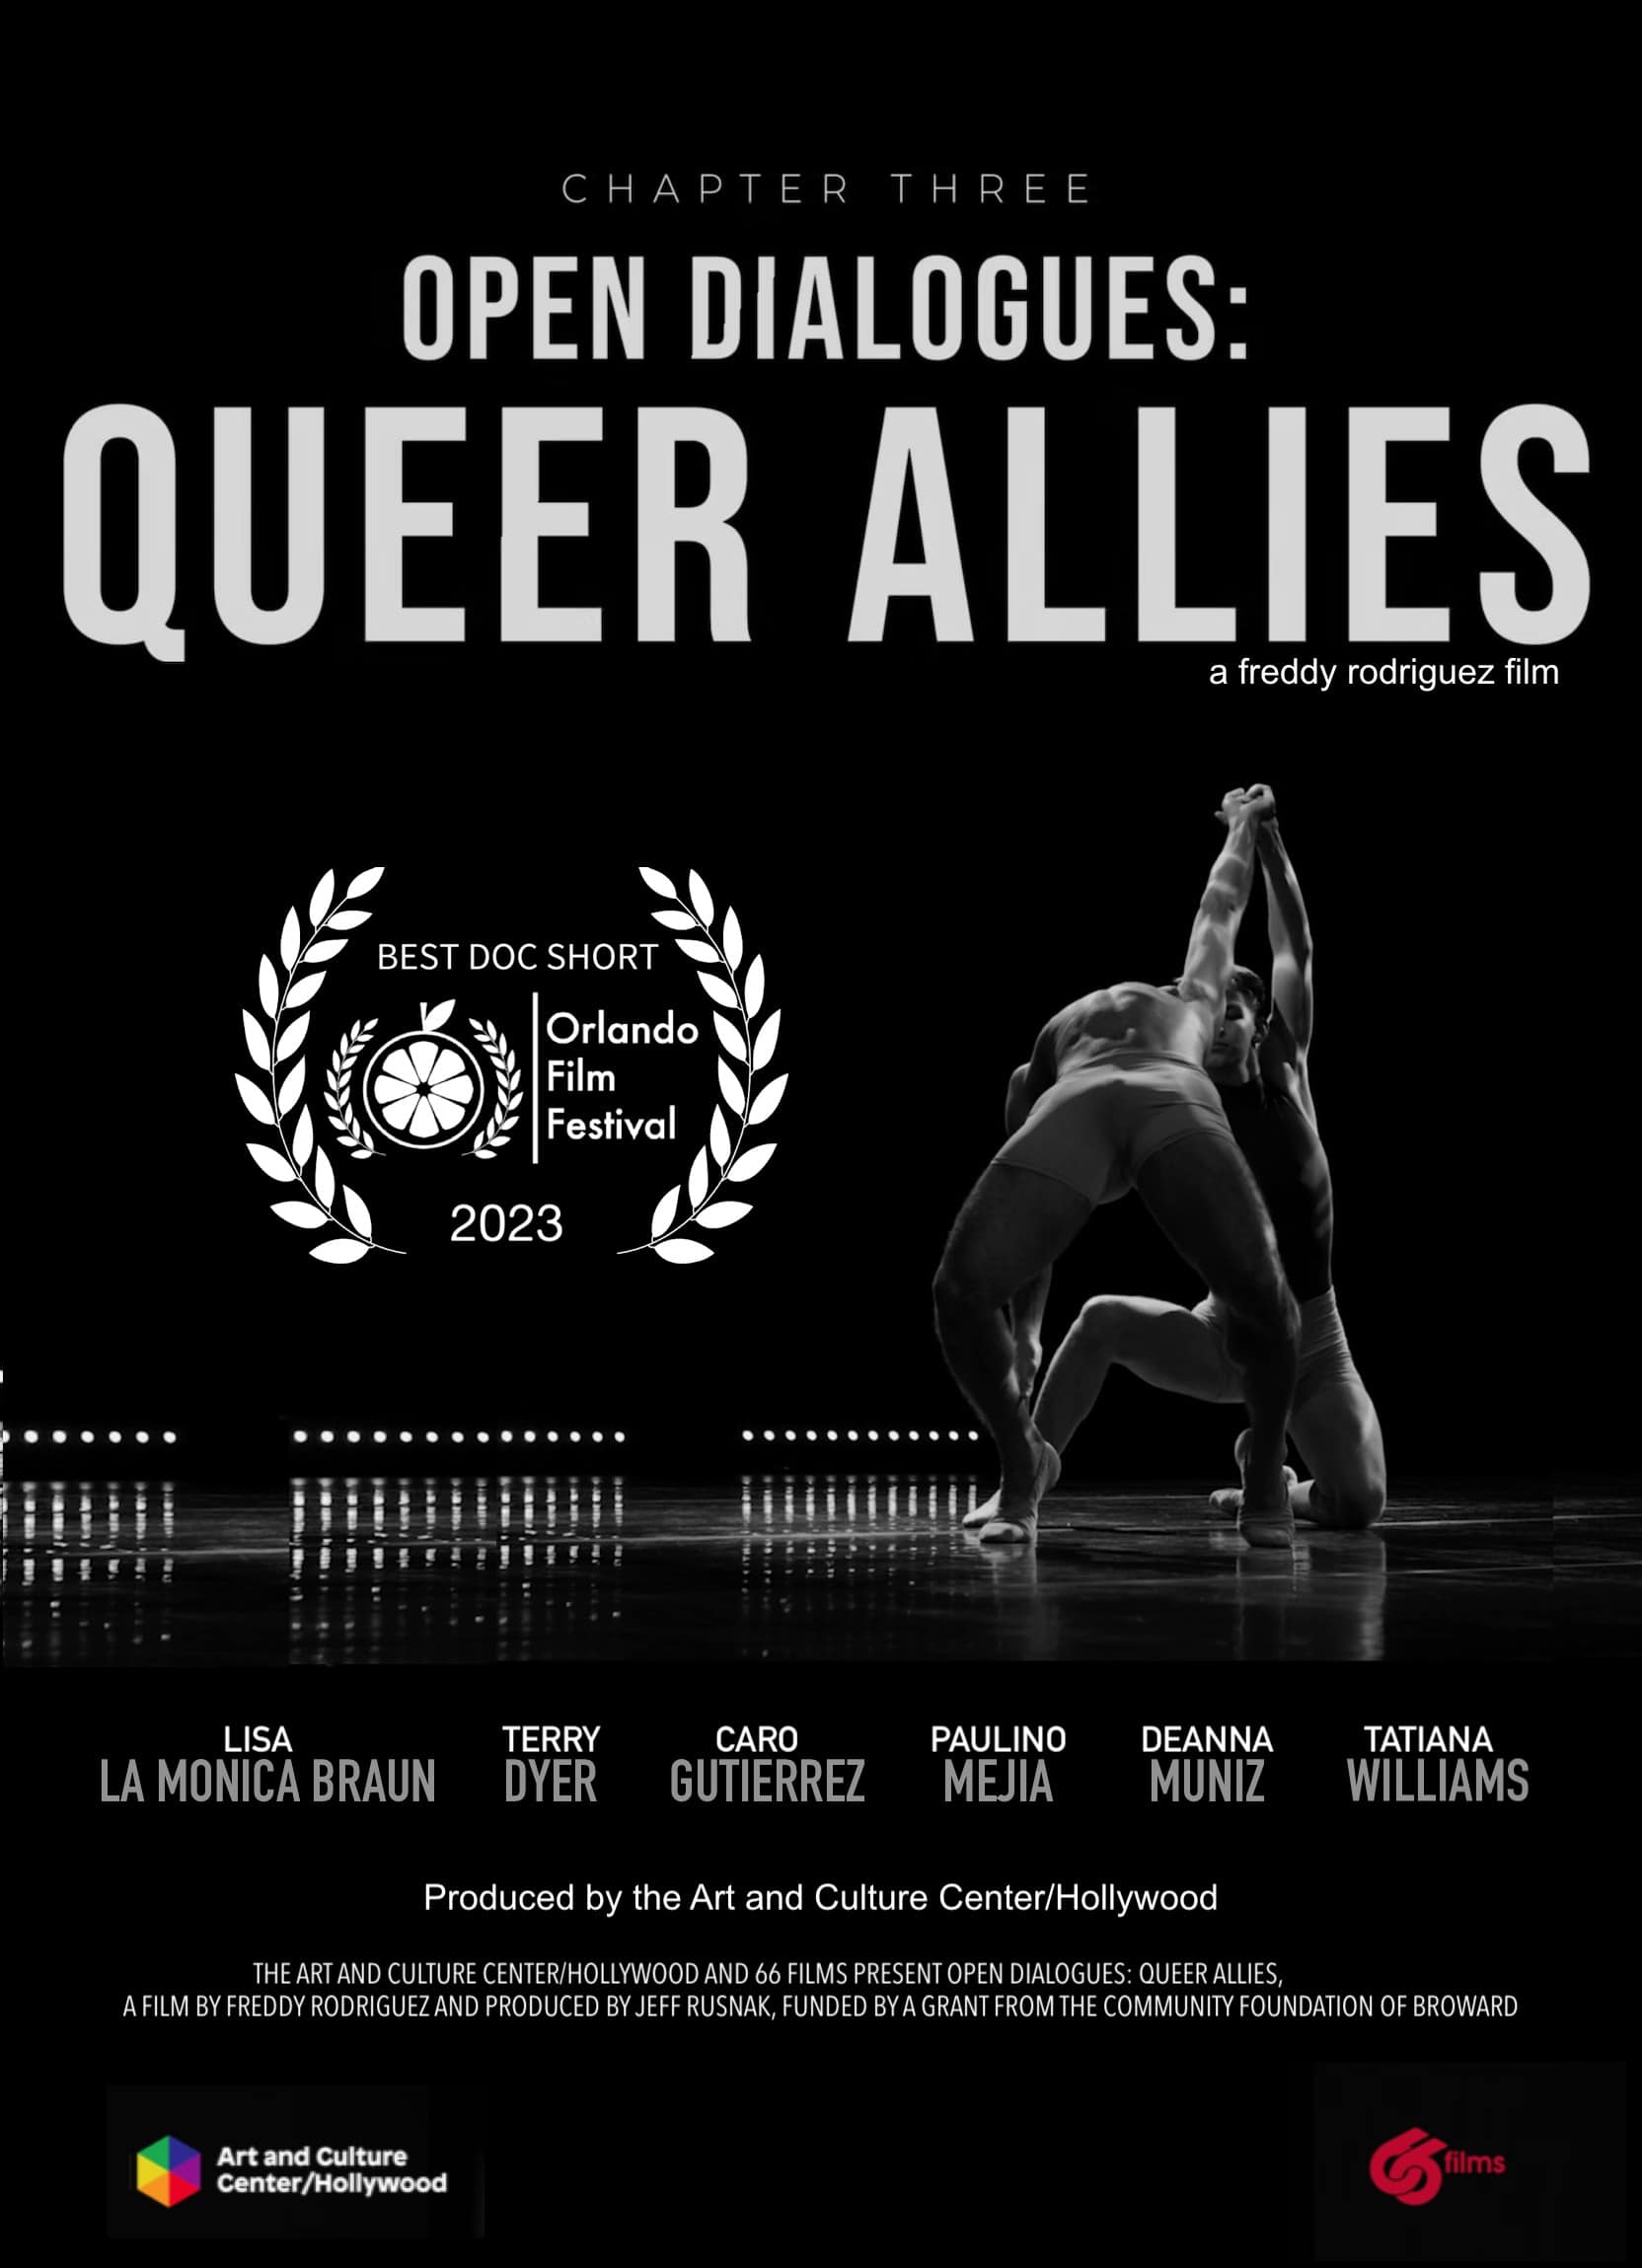 Open Dialogues: Queer Allies Poster with Orlando Film Festival "Best Doc Short" Laurels